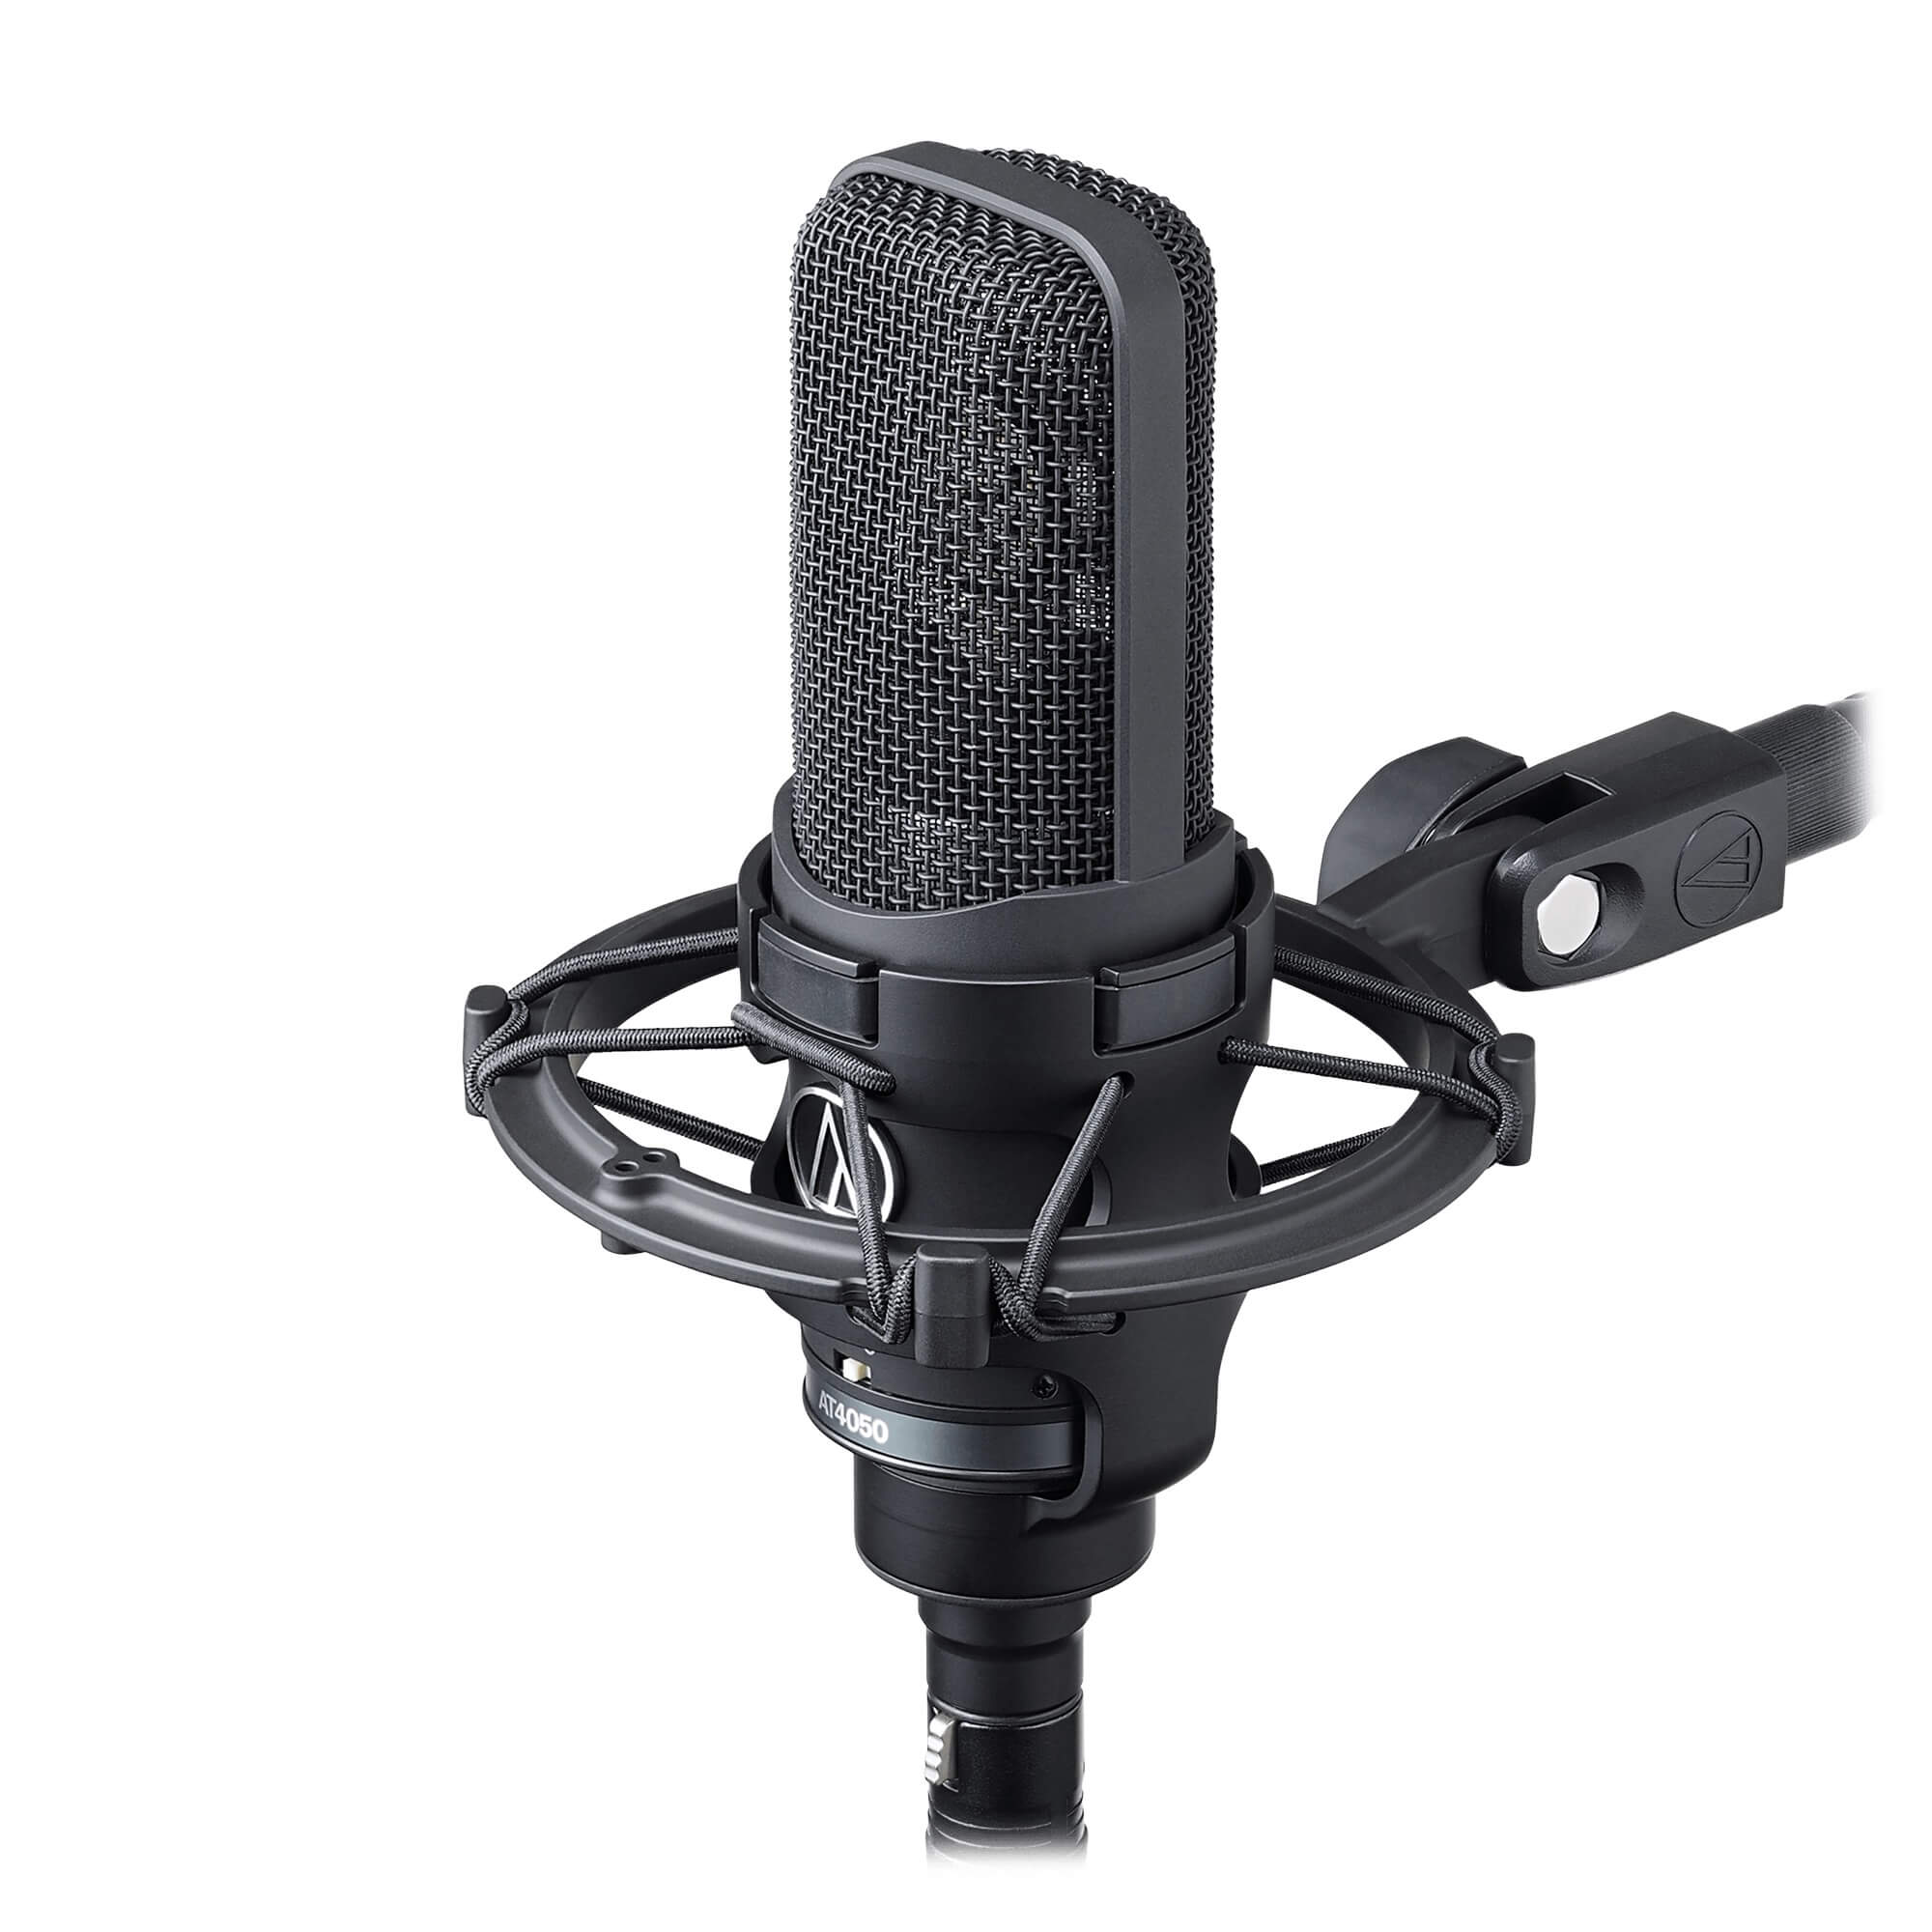 Audio-Technica AT4050 Multi-pattern Condenser Microphone with custom shock mount